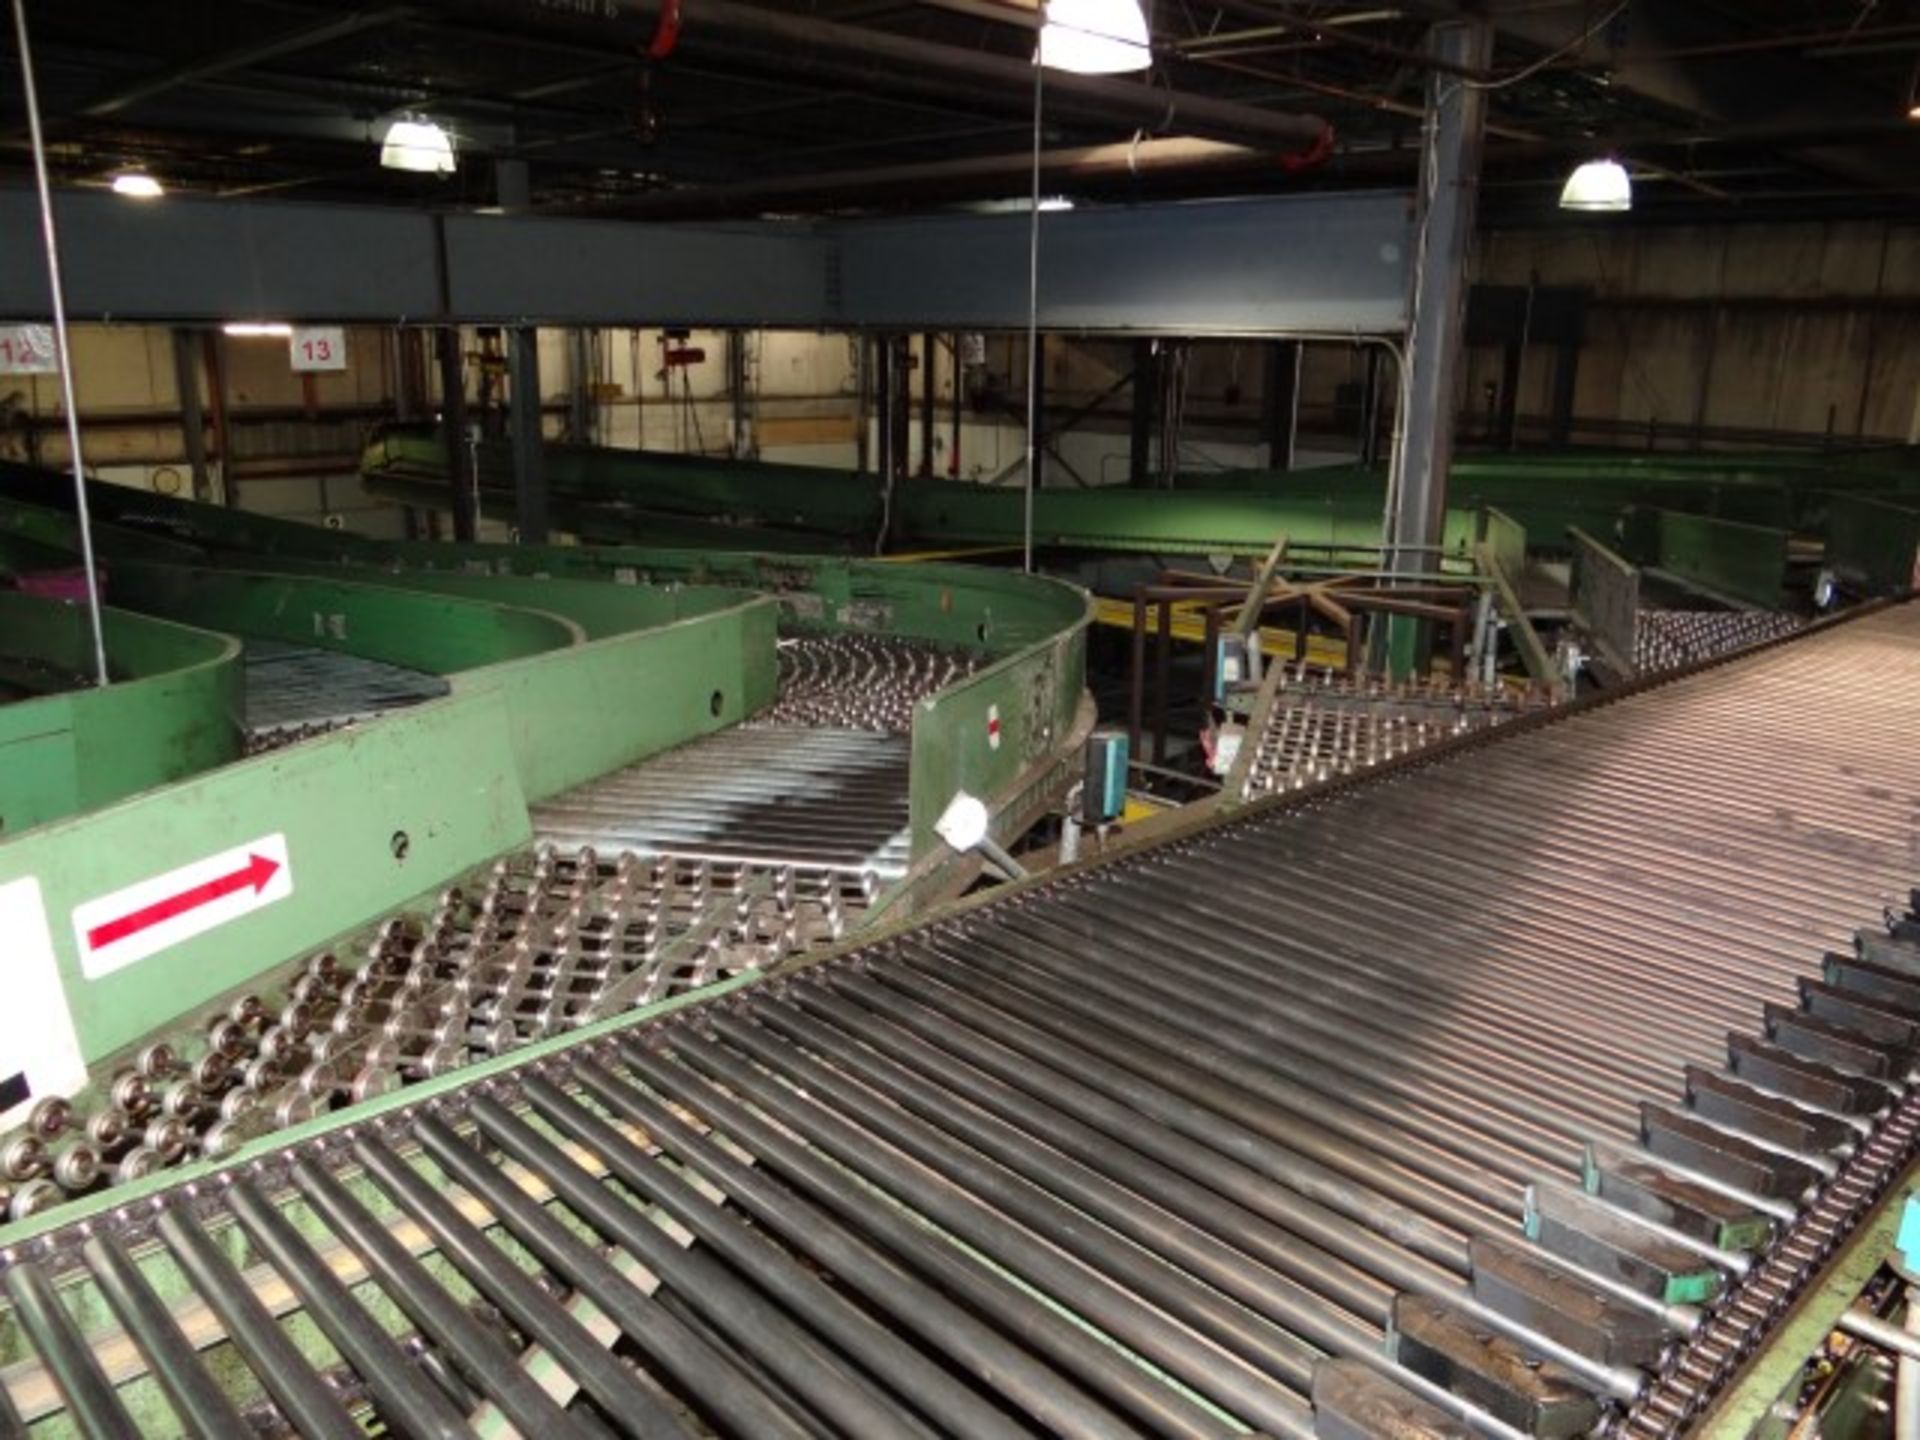 Sortation Line Conveyor, Two Controls, and 6 Drop Down Conveyors - Image 12 of 22